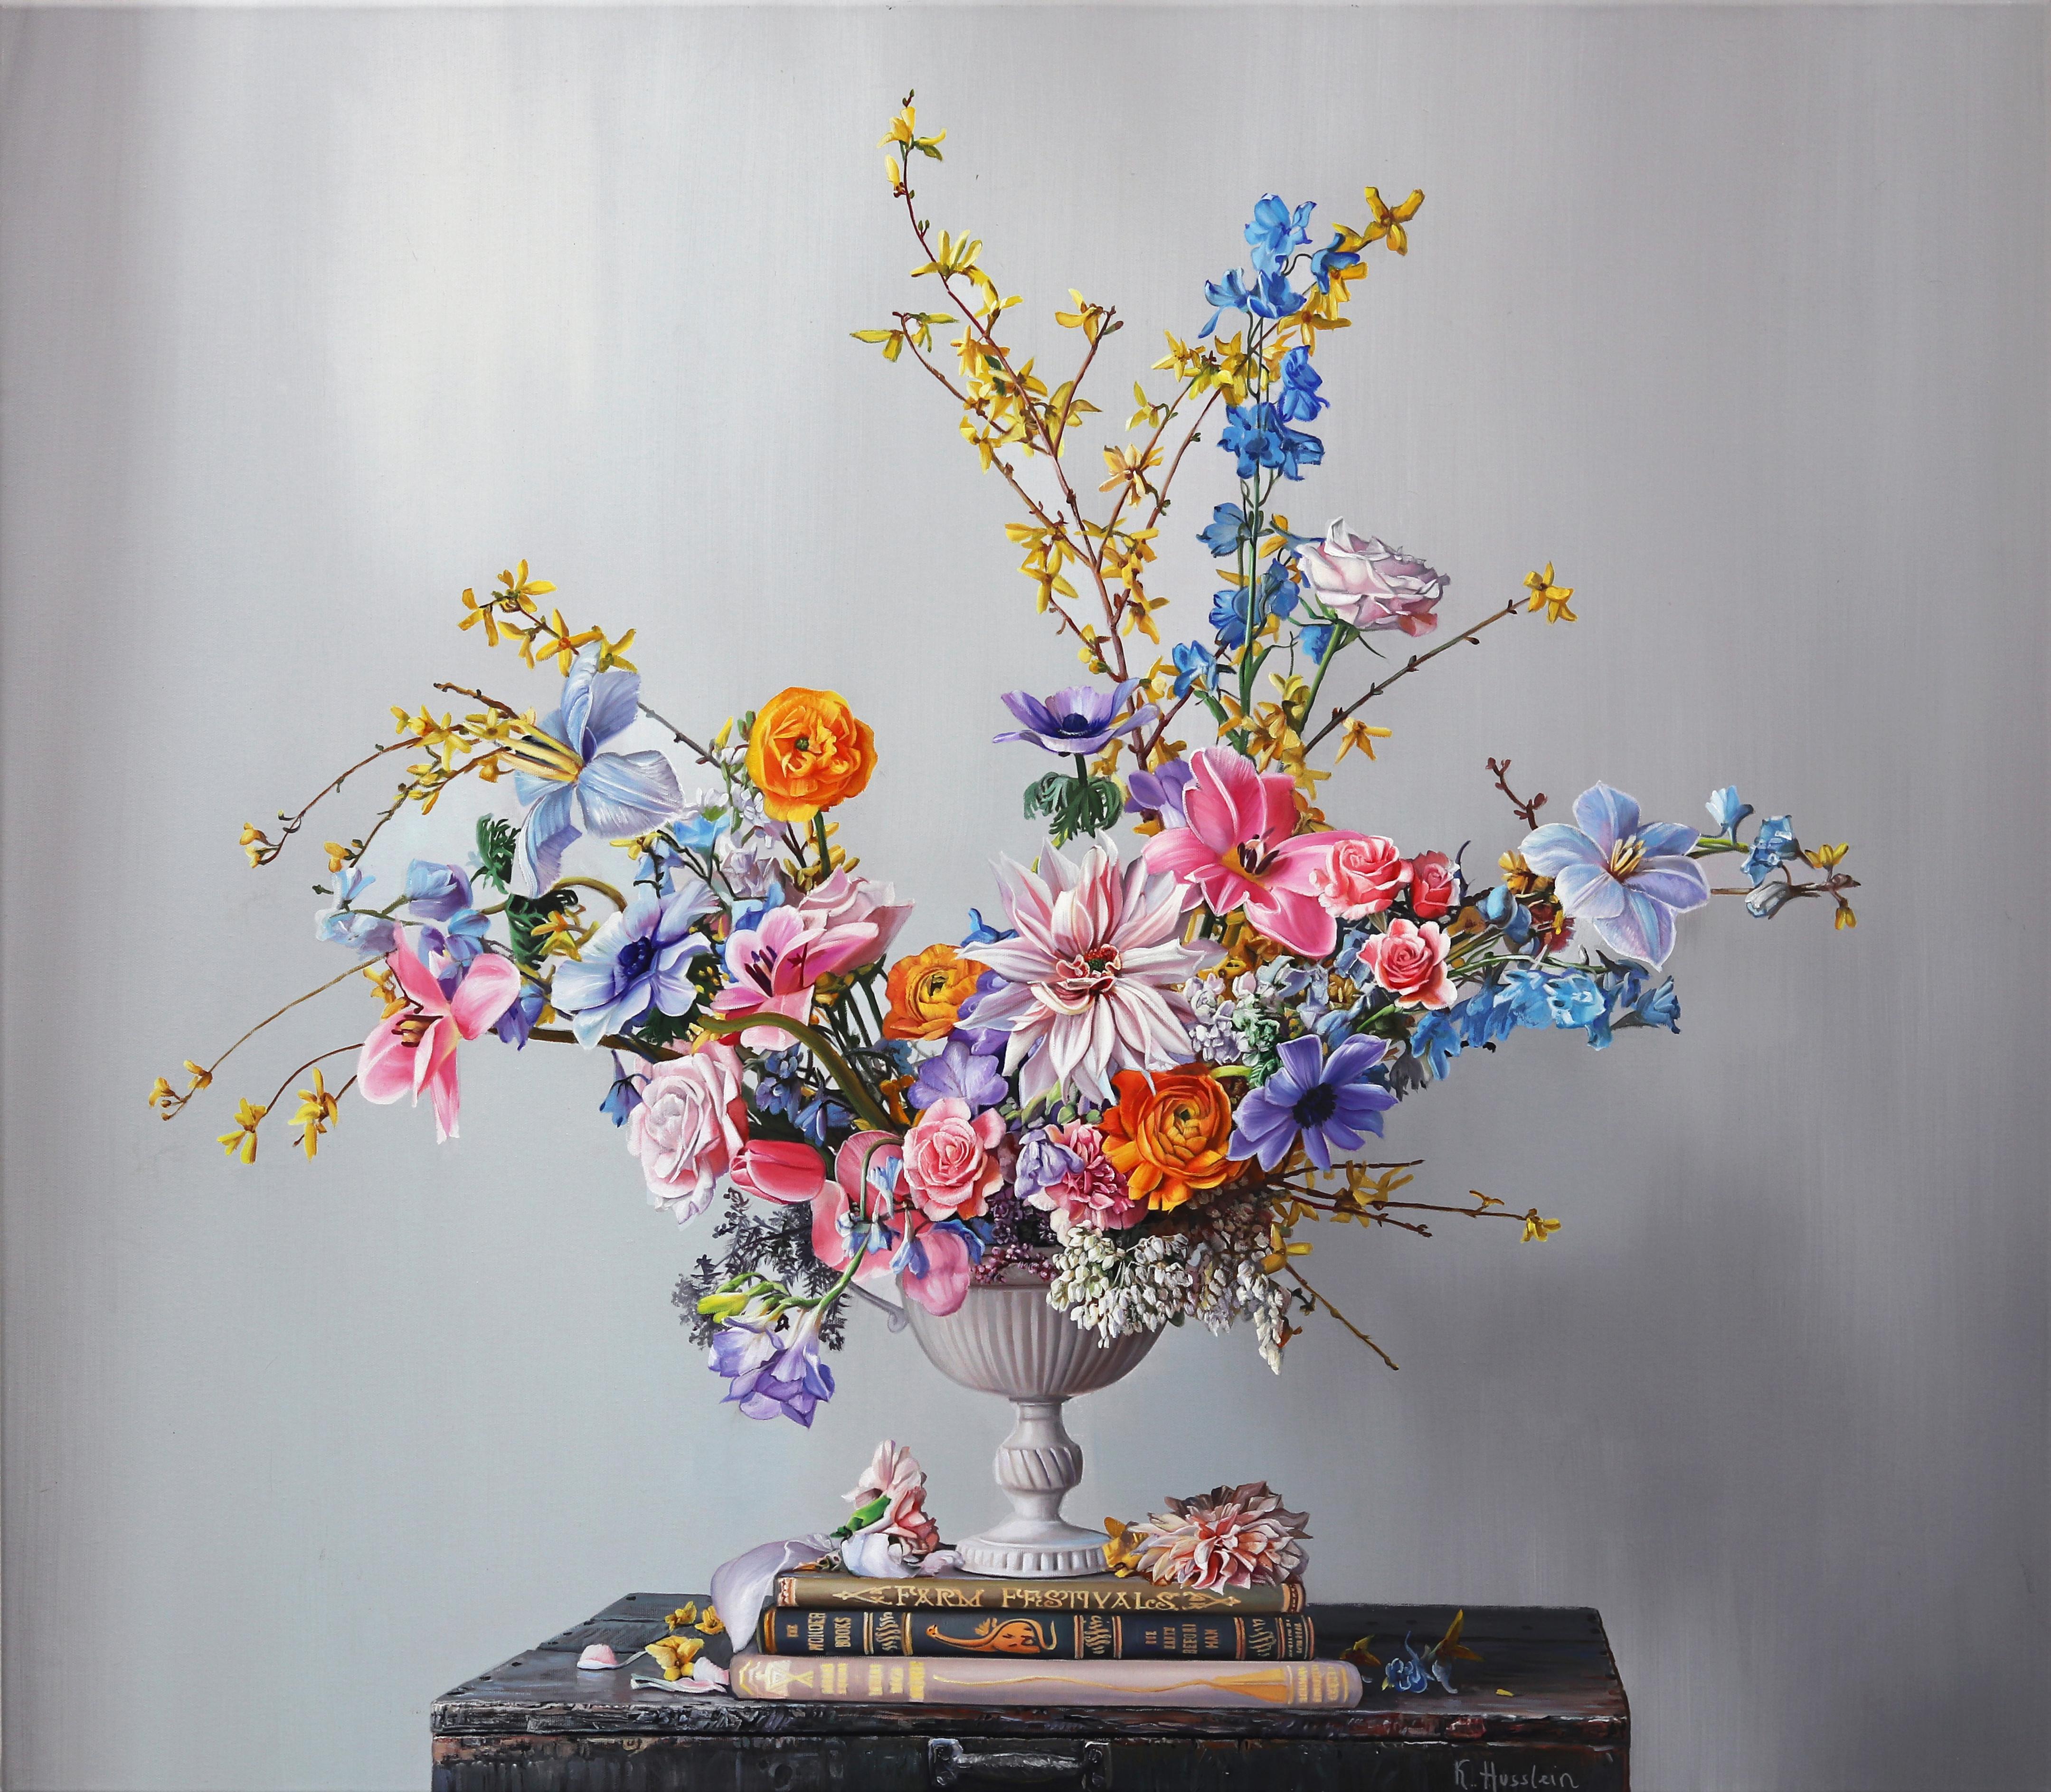 By That Magic Thread That Cannot Be Untied - Floral Still Life Oil Painting